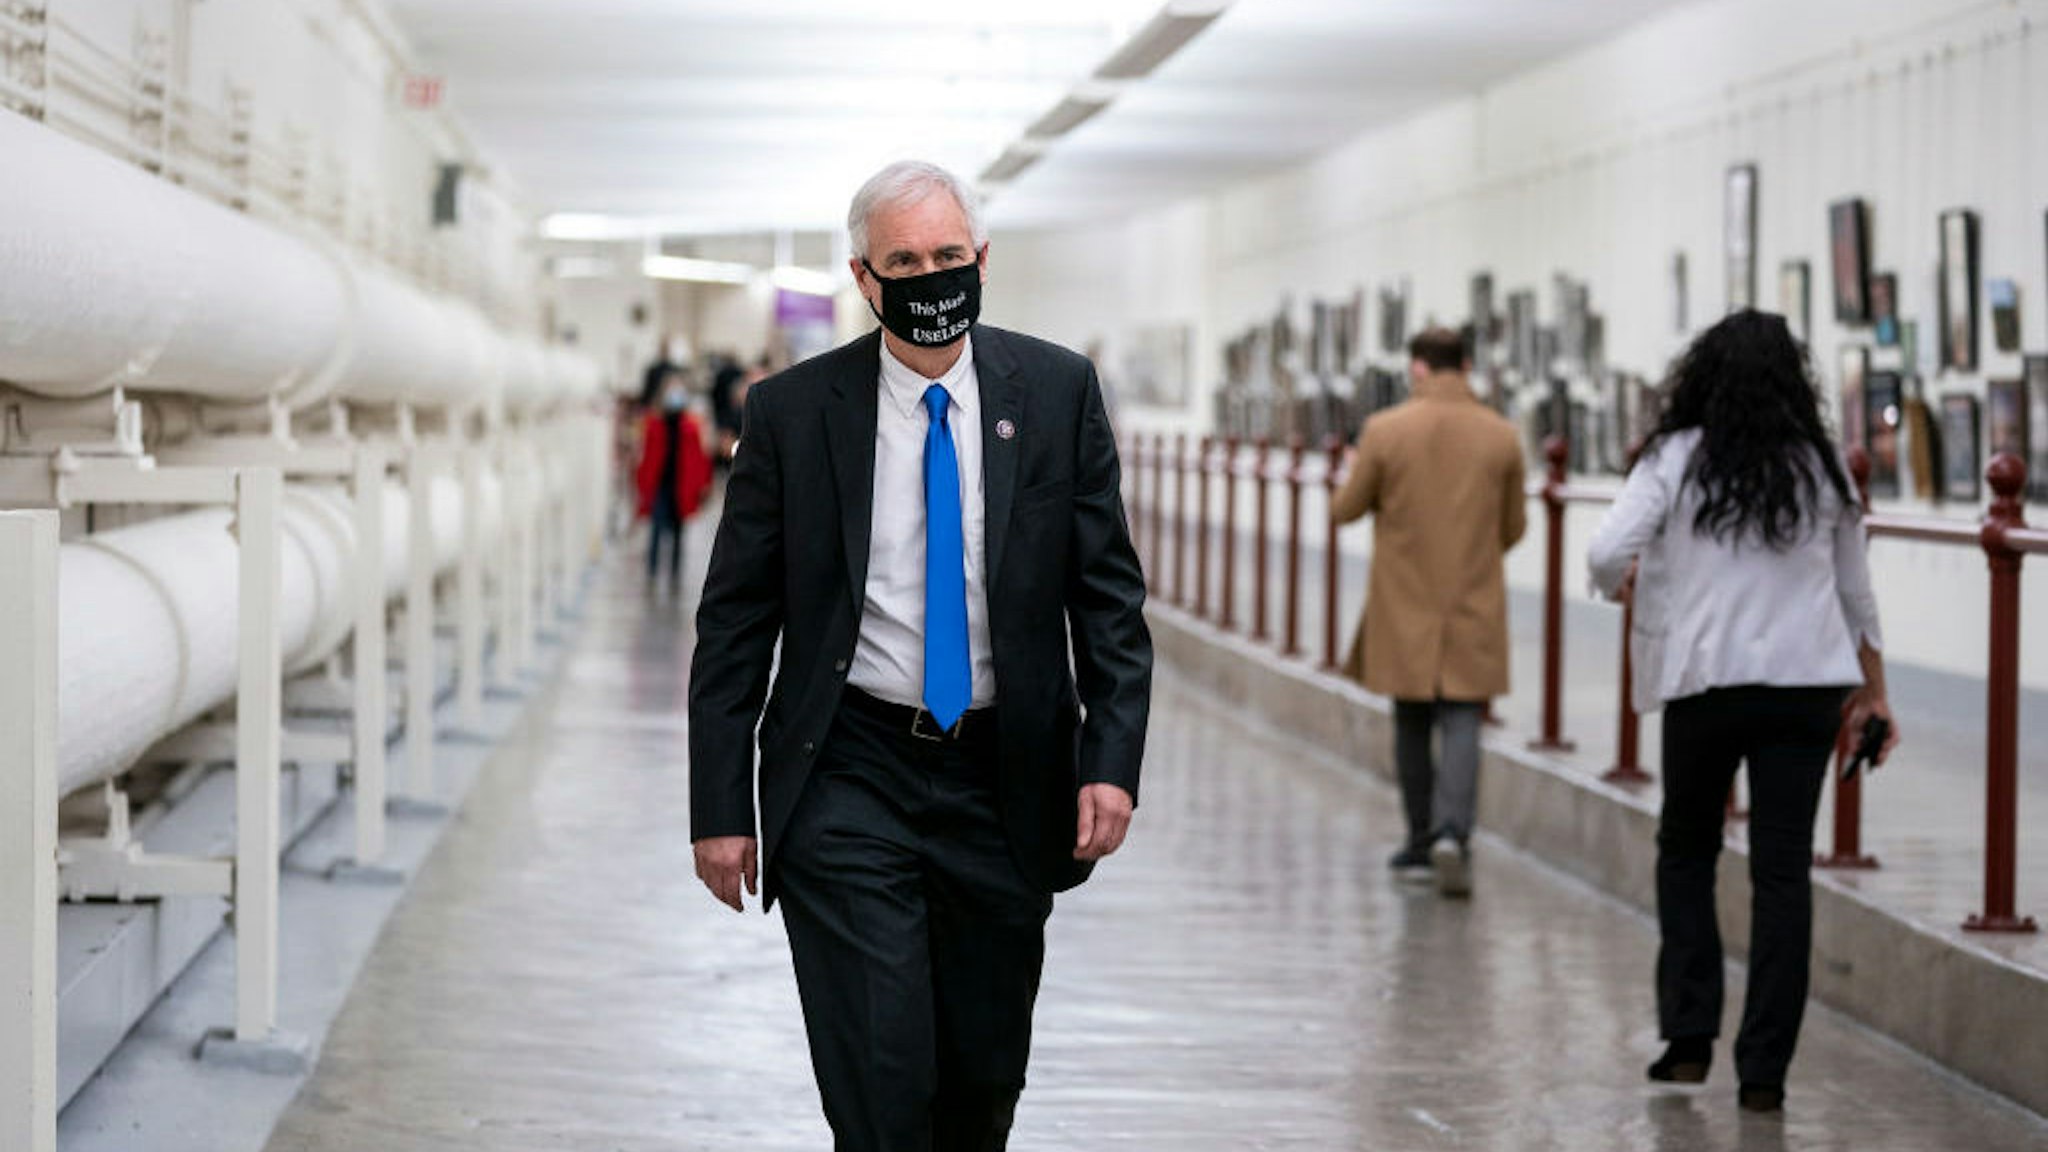 WASHINGTON, DC - JANUARY 12: Rep. Tom McClintock (R-CA) wears a protective mask while walking through the Canon Tunnel to the U.S. Capitol on January 12, 2021 in Washington, DC. Today the House of Representatives plans to vote on Rep. Jamie Raskin's (D-MD) resolution calling on Vice President Mike Pence to invoke the 25th Amendment, removing President Trump from office. On Wednesday, House Democrats plan on voting on articles of impeachment. (Photo by Stefani Reynolds/Getty Images)